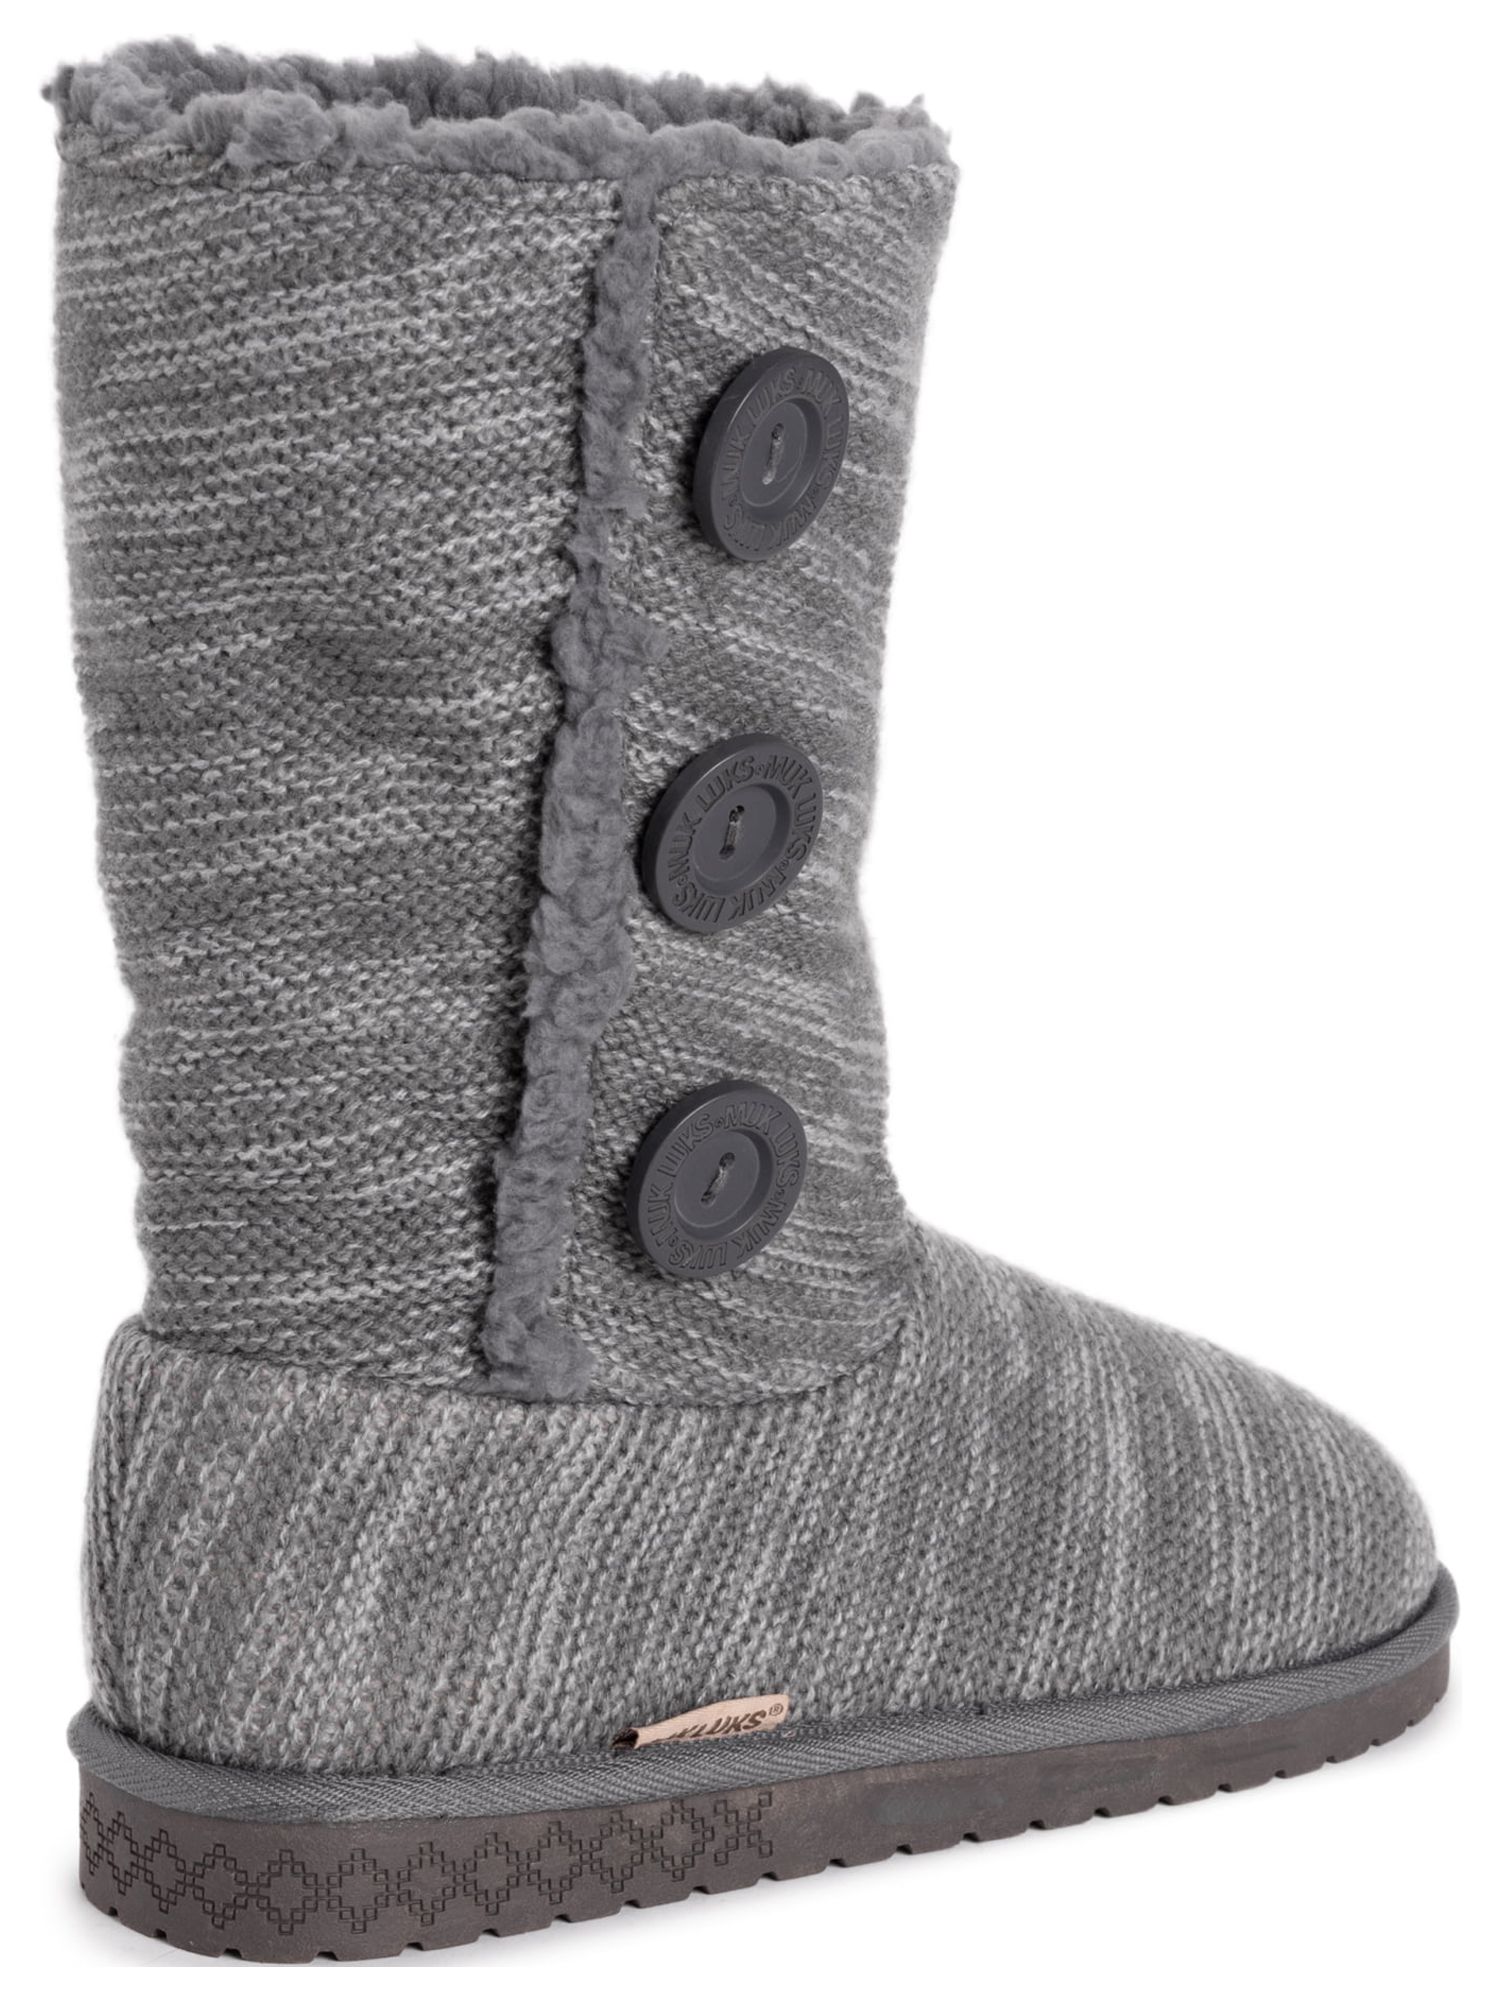 Muk Luks Women's Angel Faux Fur Lined Side Button Knit Boots - image 3 of 10